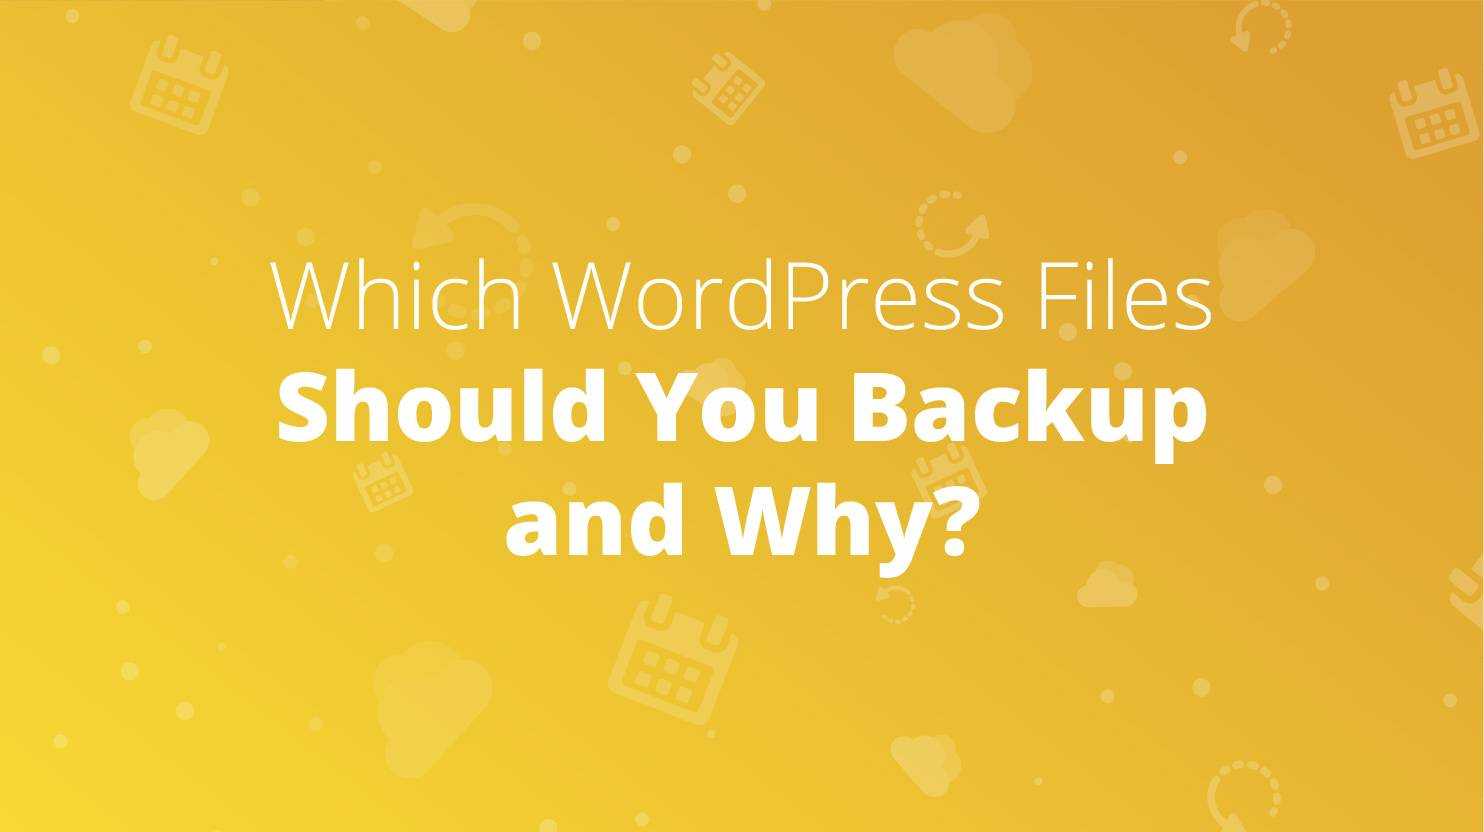 Which WordPress files should you backup